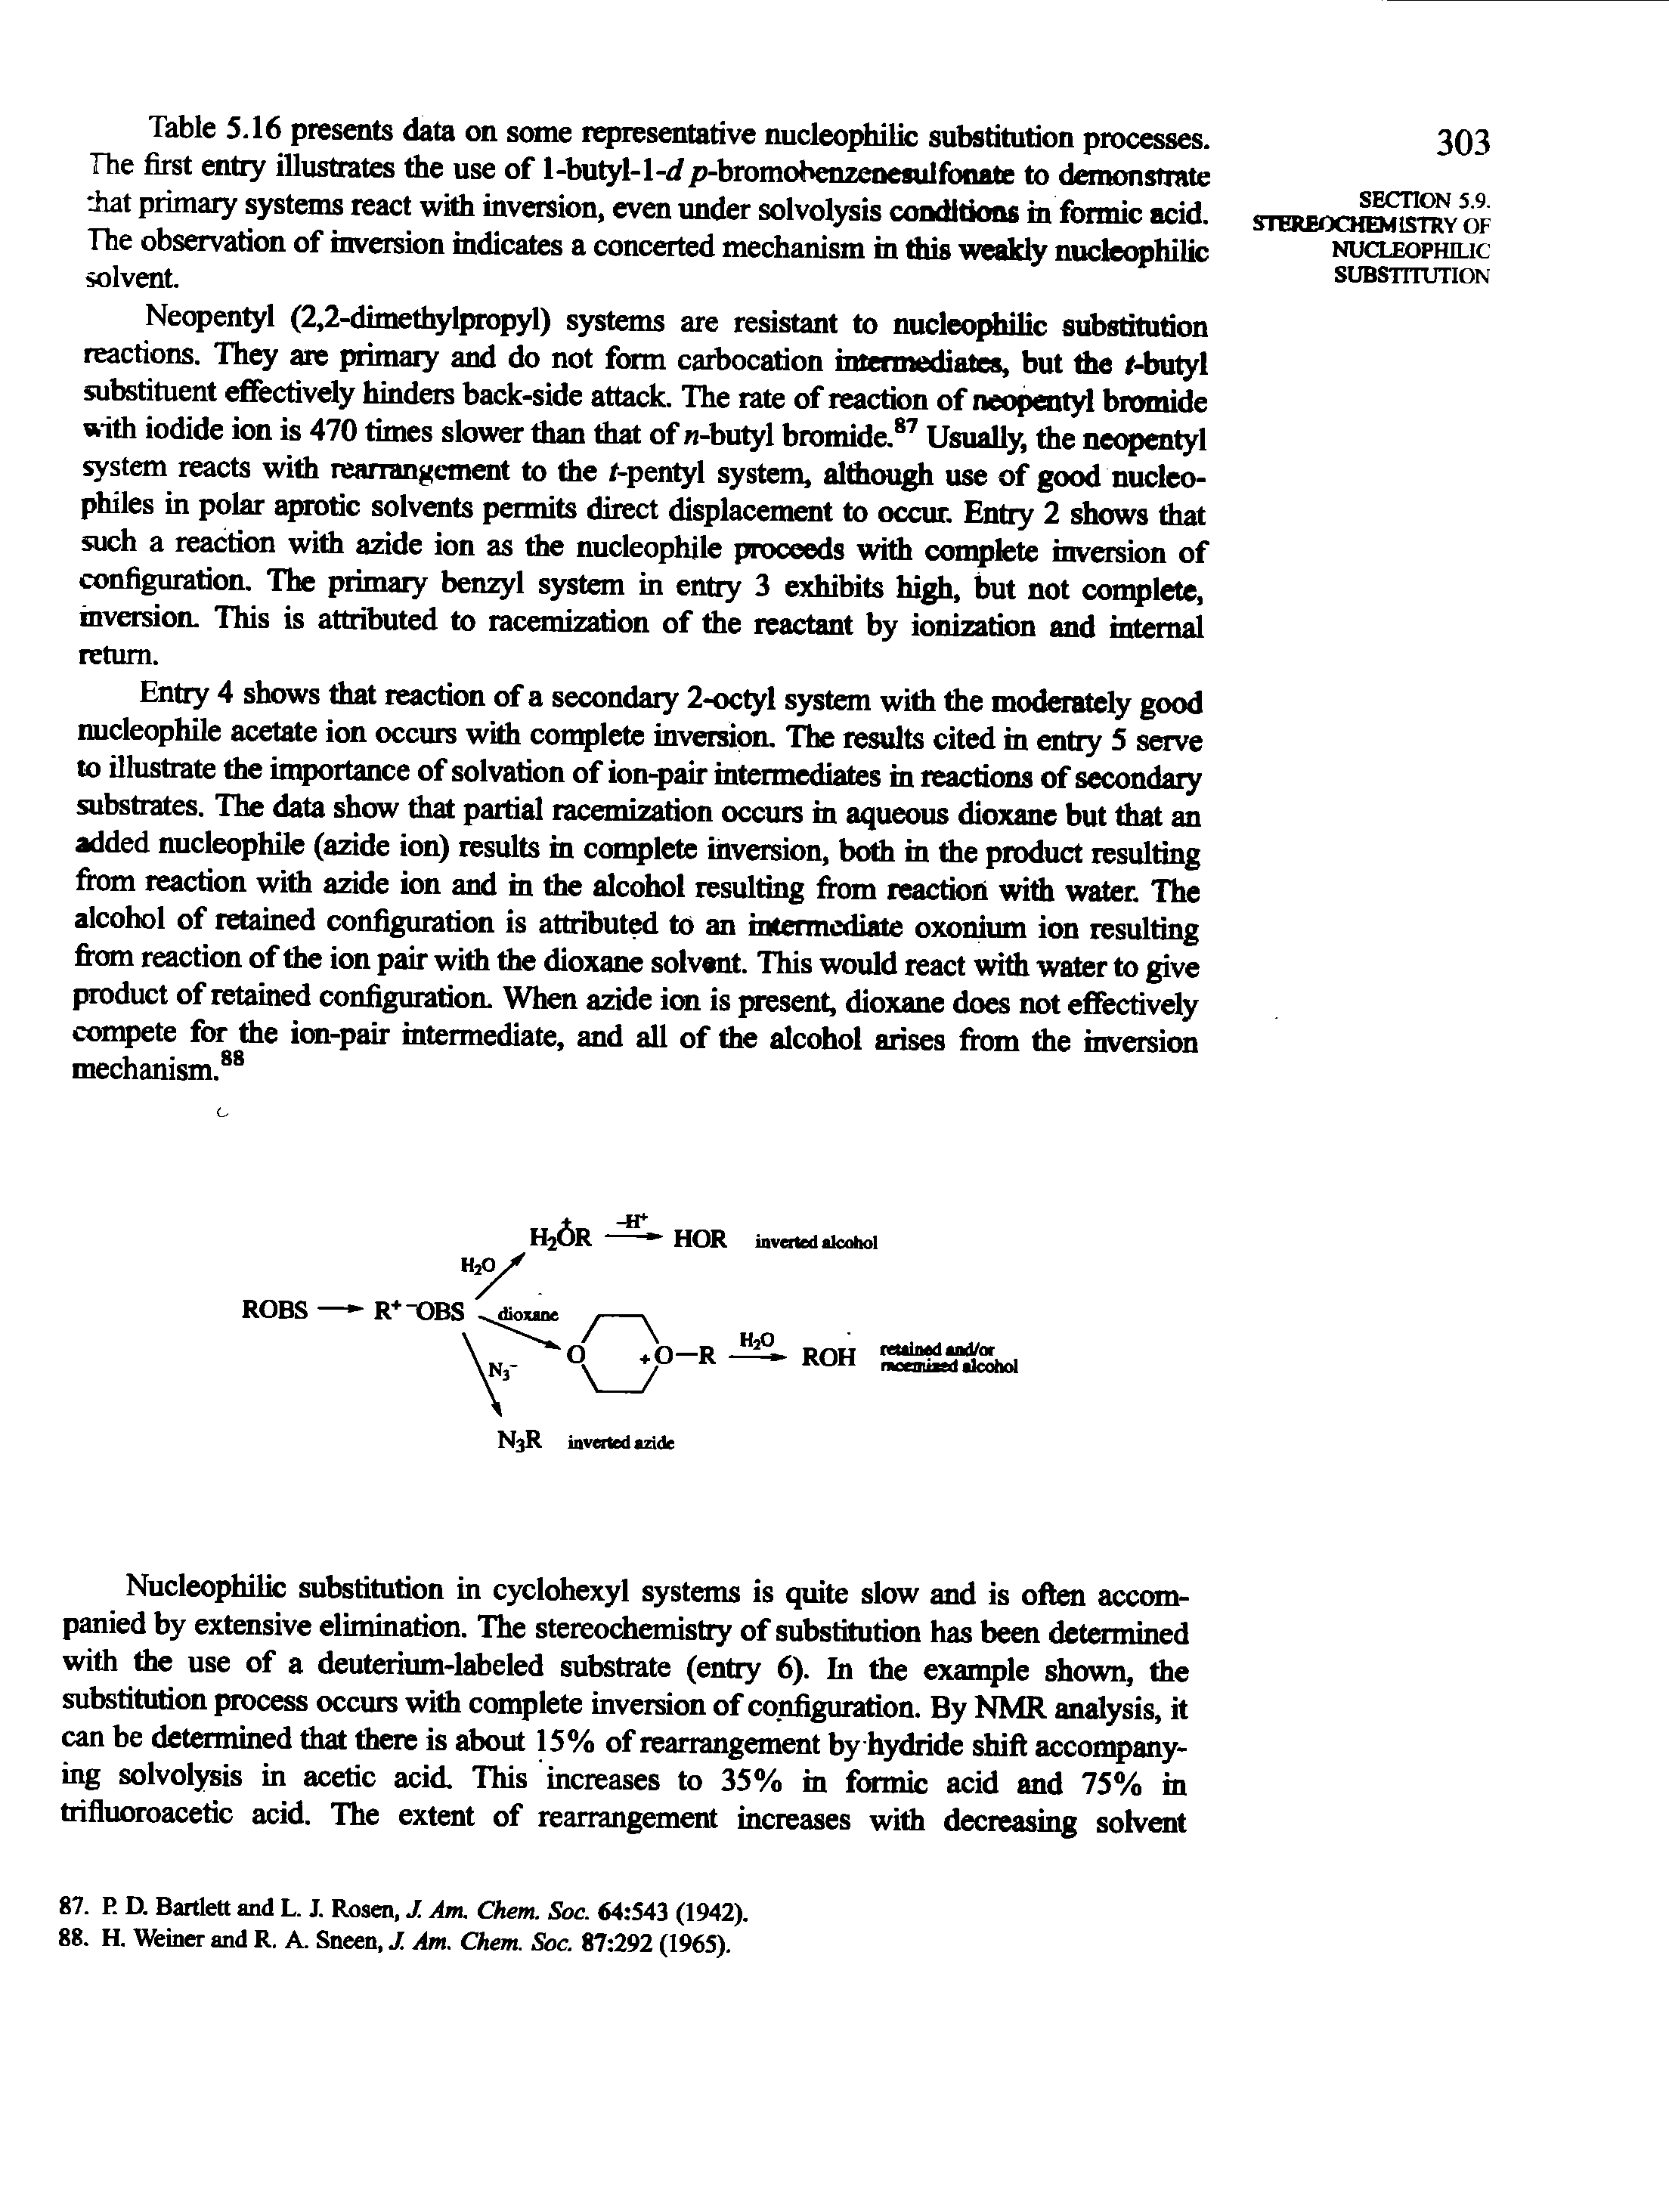 Table S.16 presents data on some representative nucleophilic substitution processes. The first entry illustrates the use of 1-butyl-l-r/p-bromobenzenesulfonate to dononstrate at primary systems react with inversion, even under solvolysis conditkms in formic acid. The observation of inversion indicates a concerted mechanism in fids weakly nucleophilic solvent.